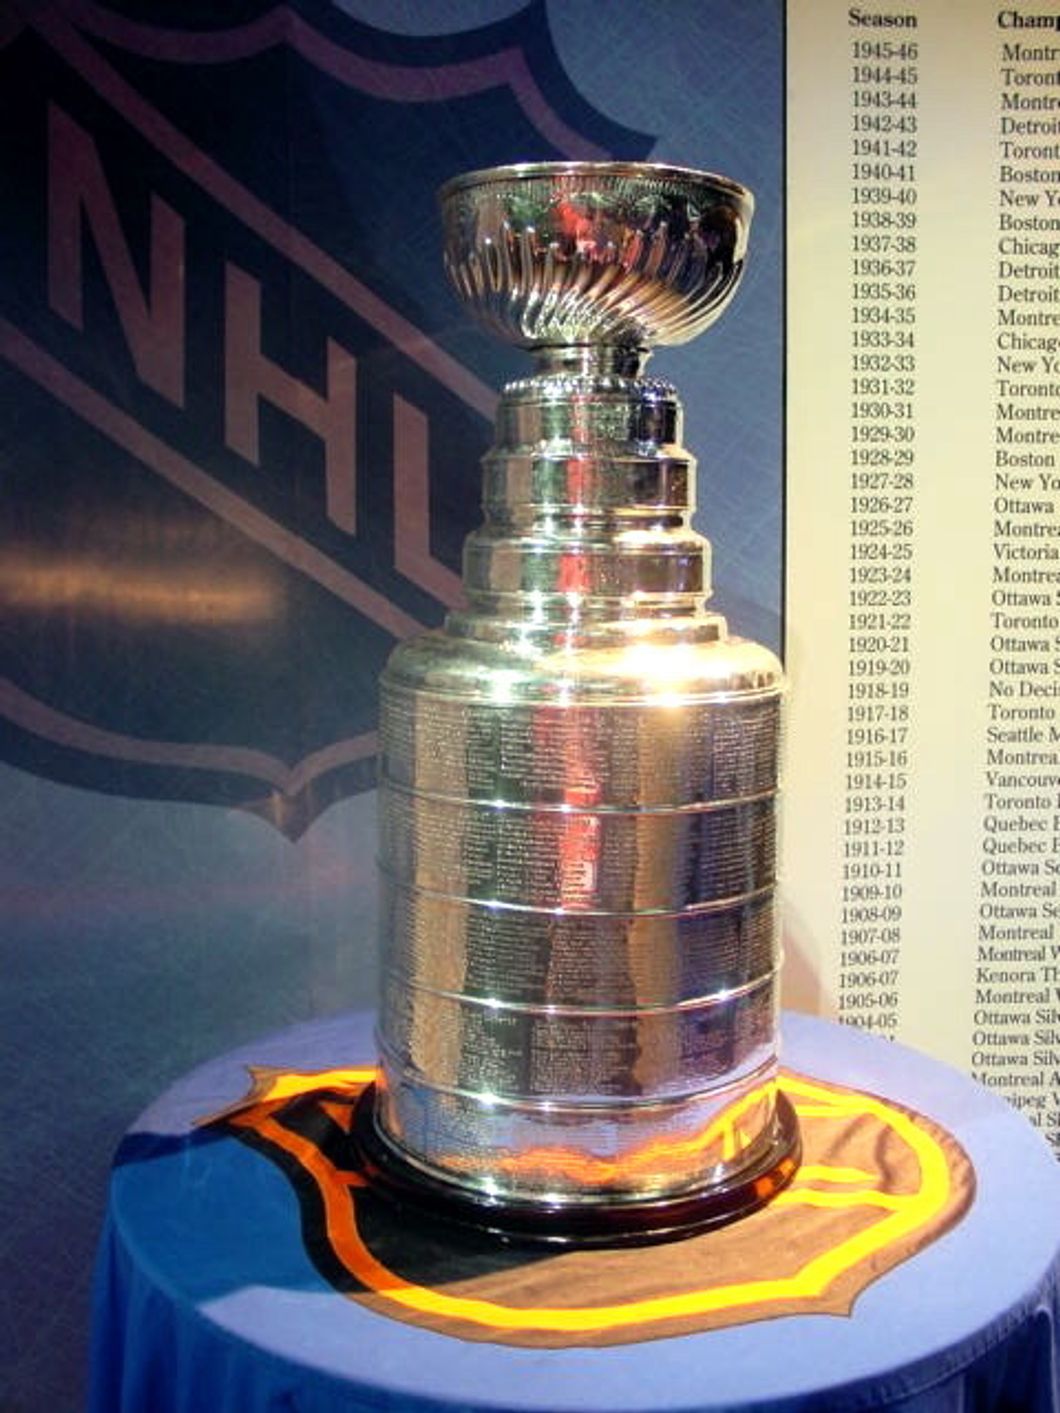 https://commons.wikimedia.org/wiki/Stanley_Cup#/media/File:StanleyCup.jpg